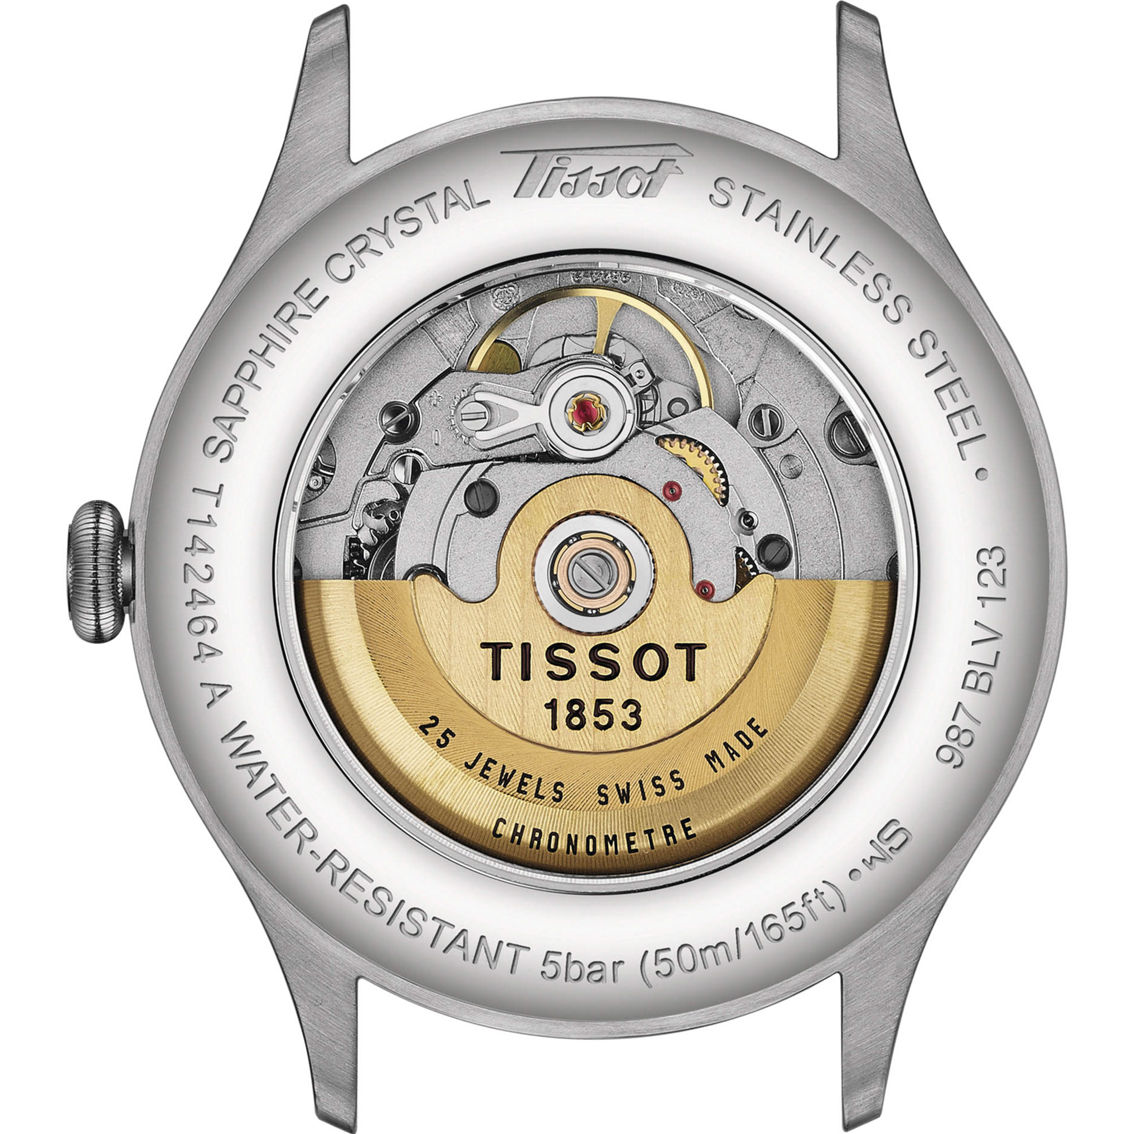 Tissot Men's / Women's Heritage 1938 Automatic COSC Watch T1424641606200 - Image 2 of 5